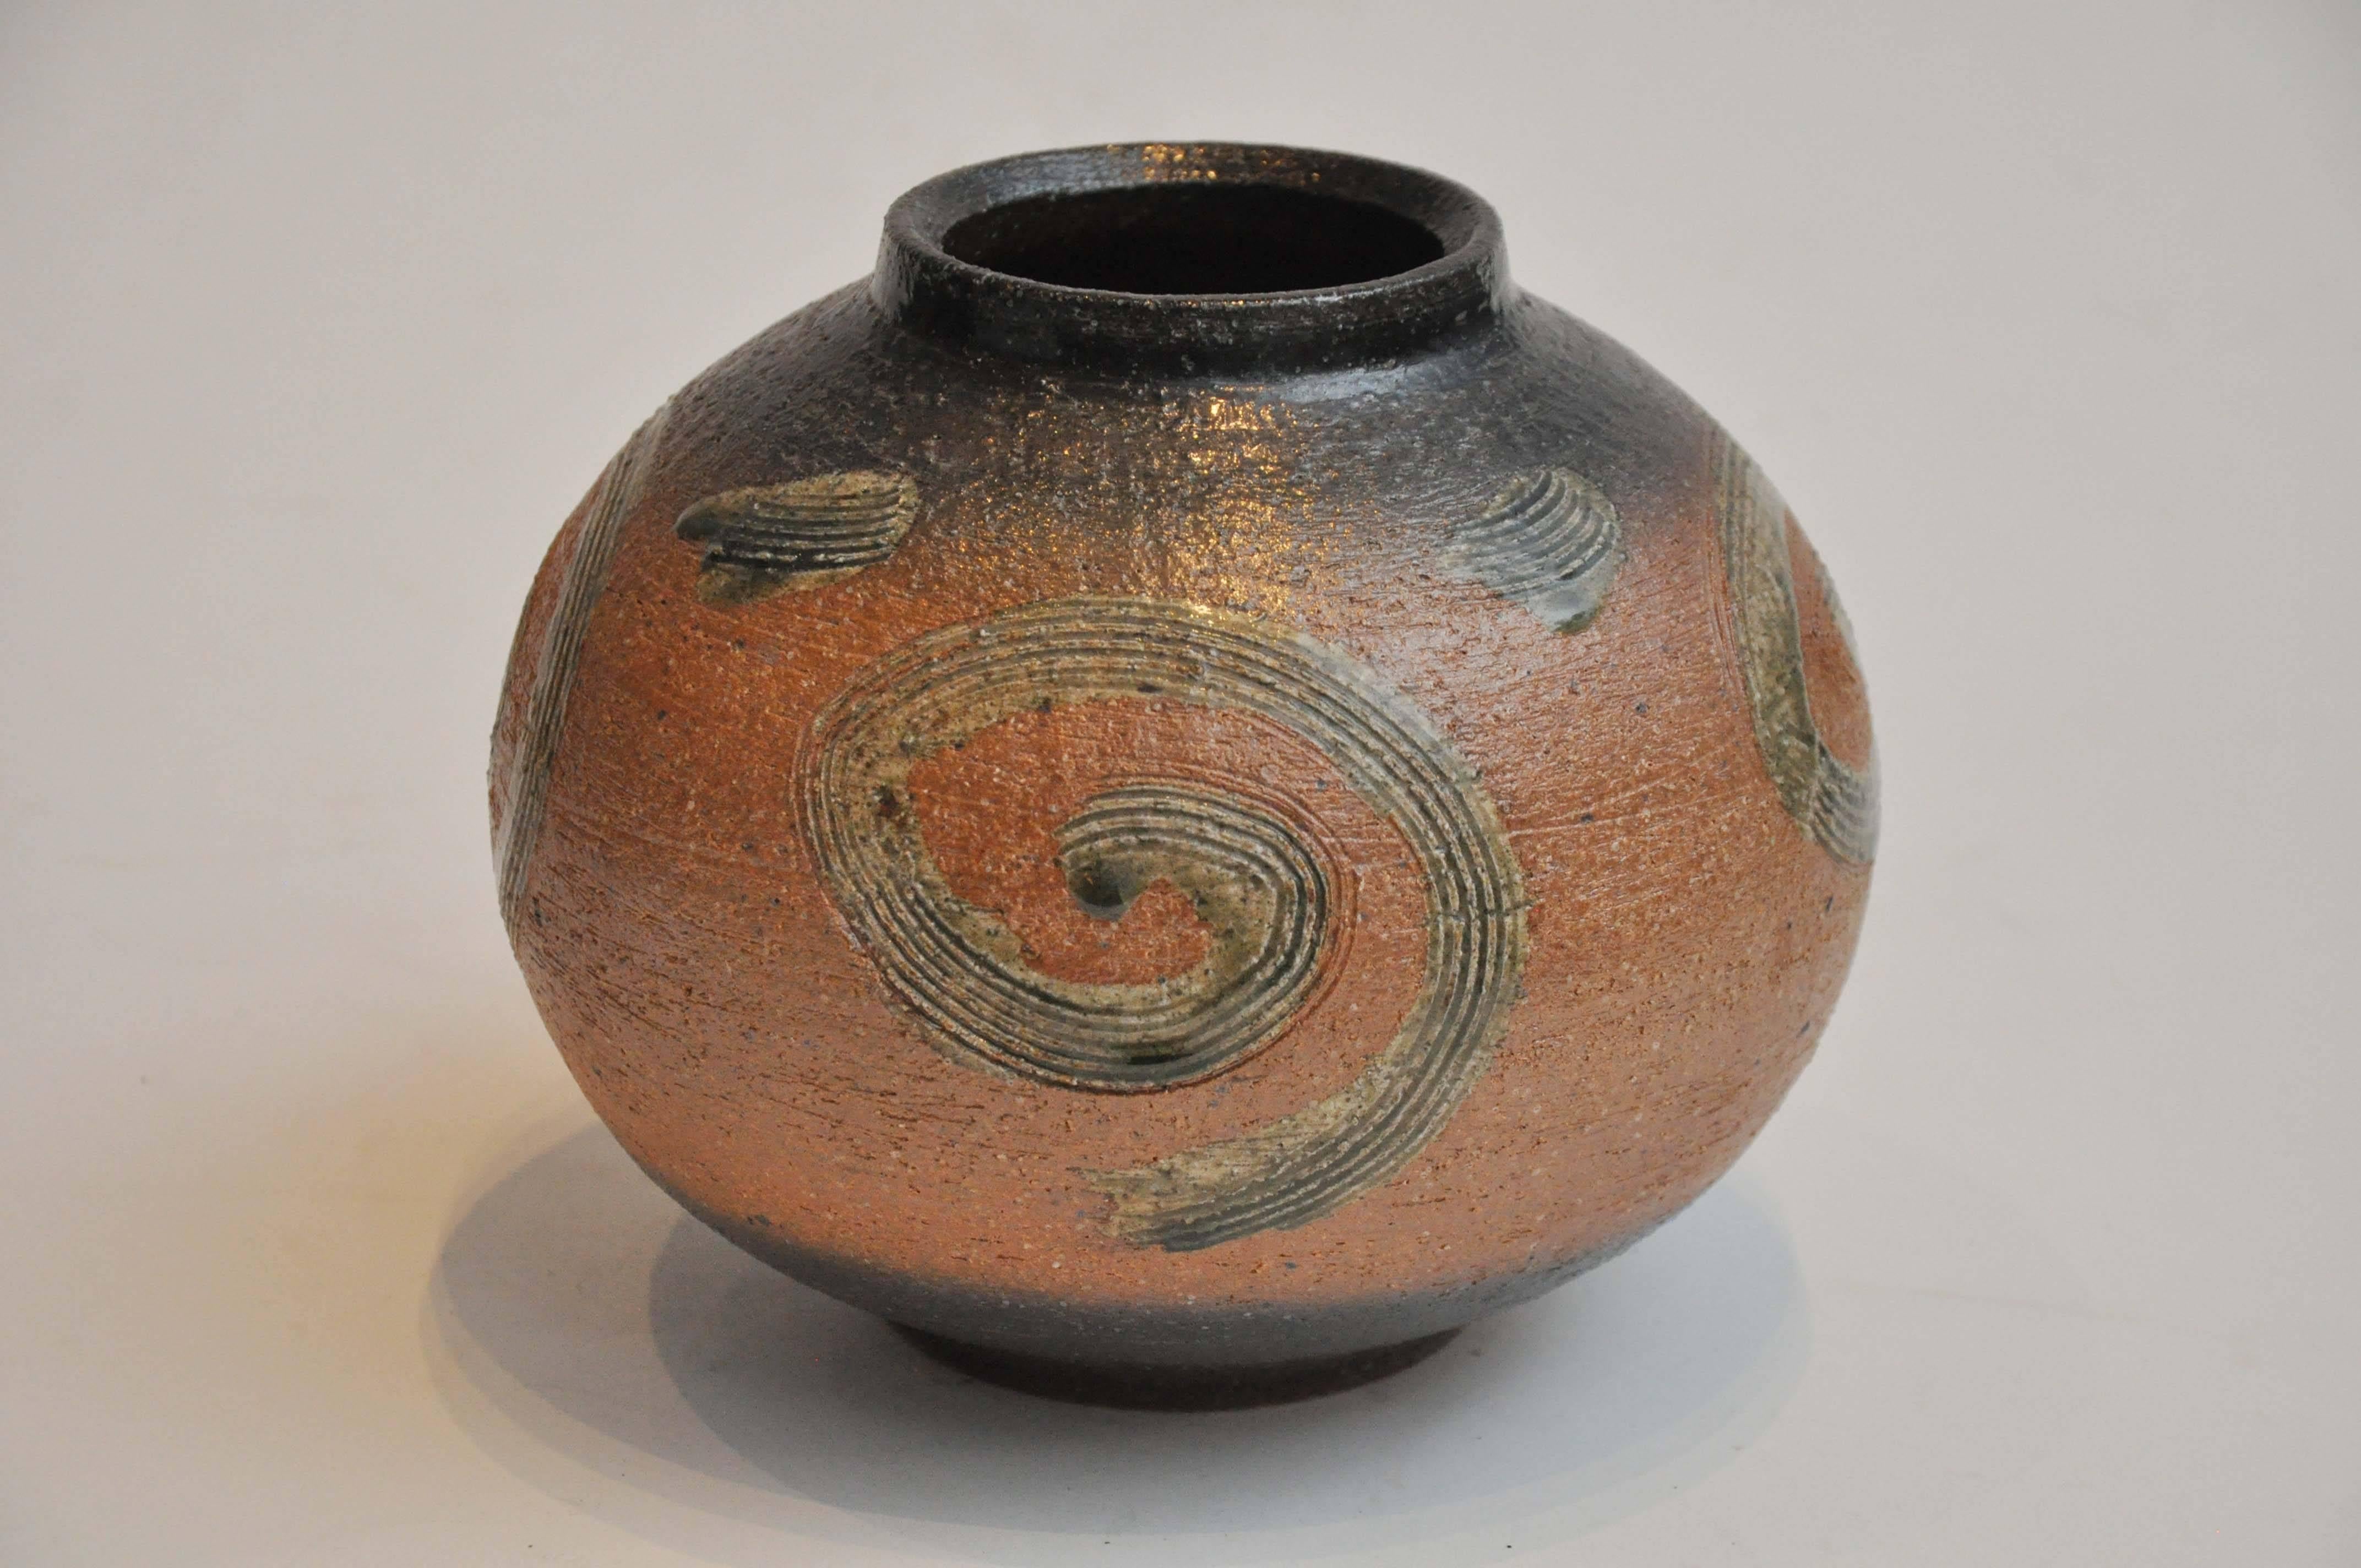 Late 20th century Shihraki pot from Japan. Beautiful Japanese Studio pot has a textural finish of swirls in its body.

Dimensions: Japanese - 8